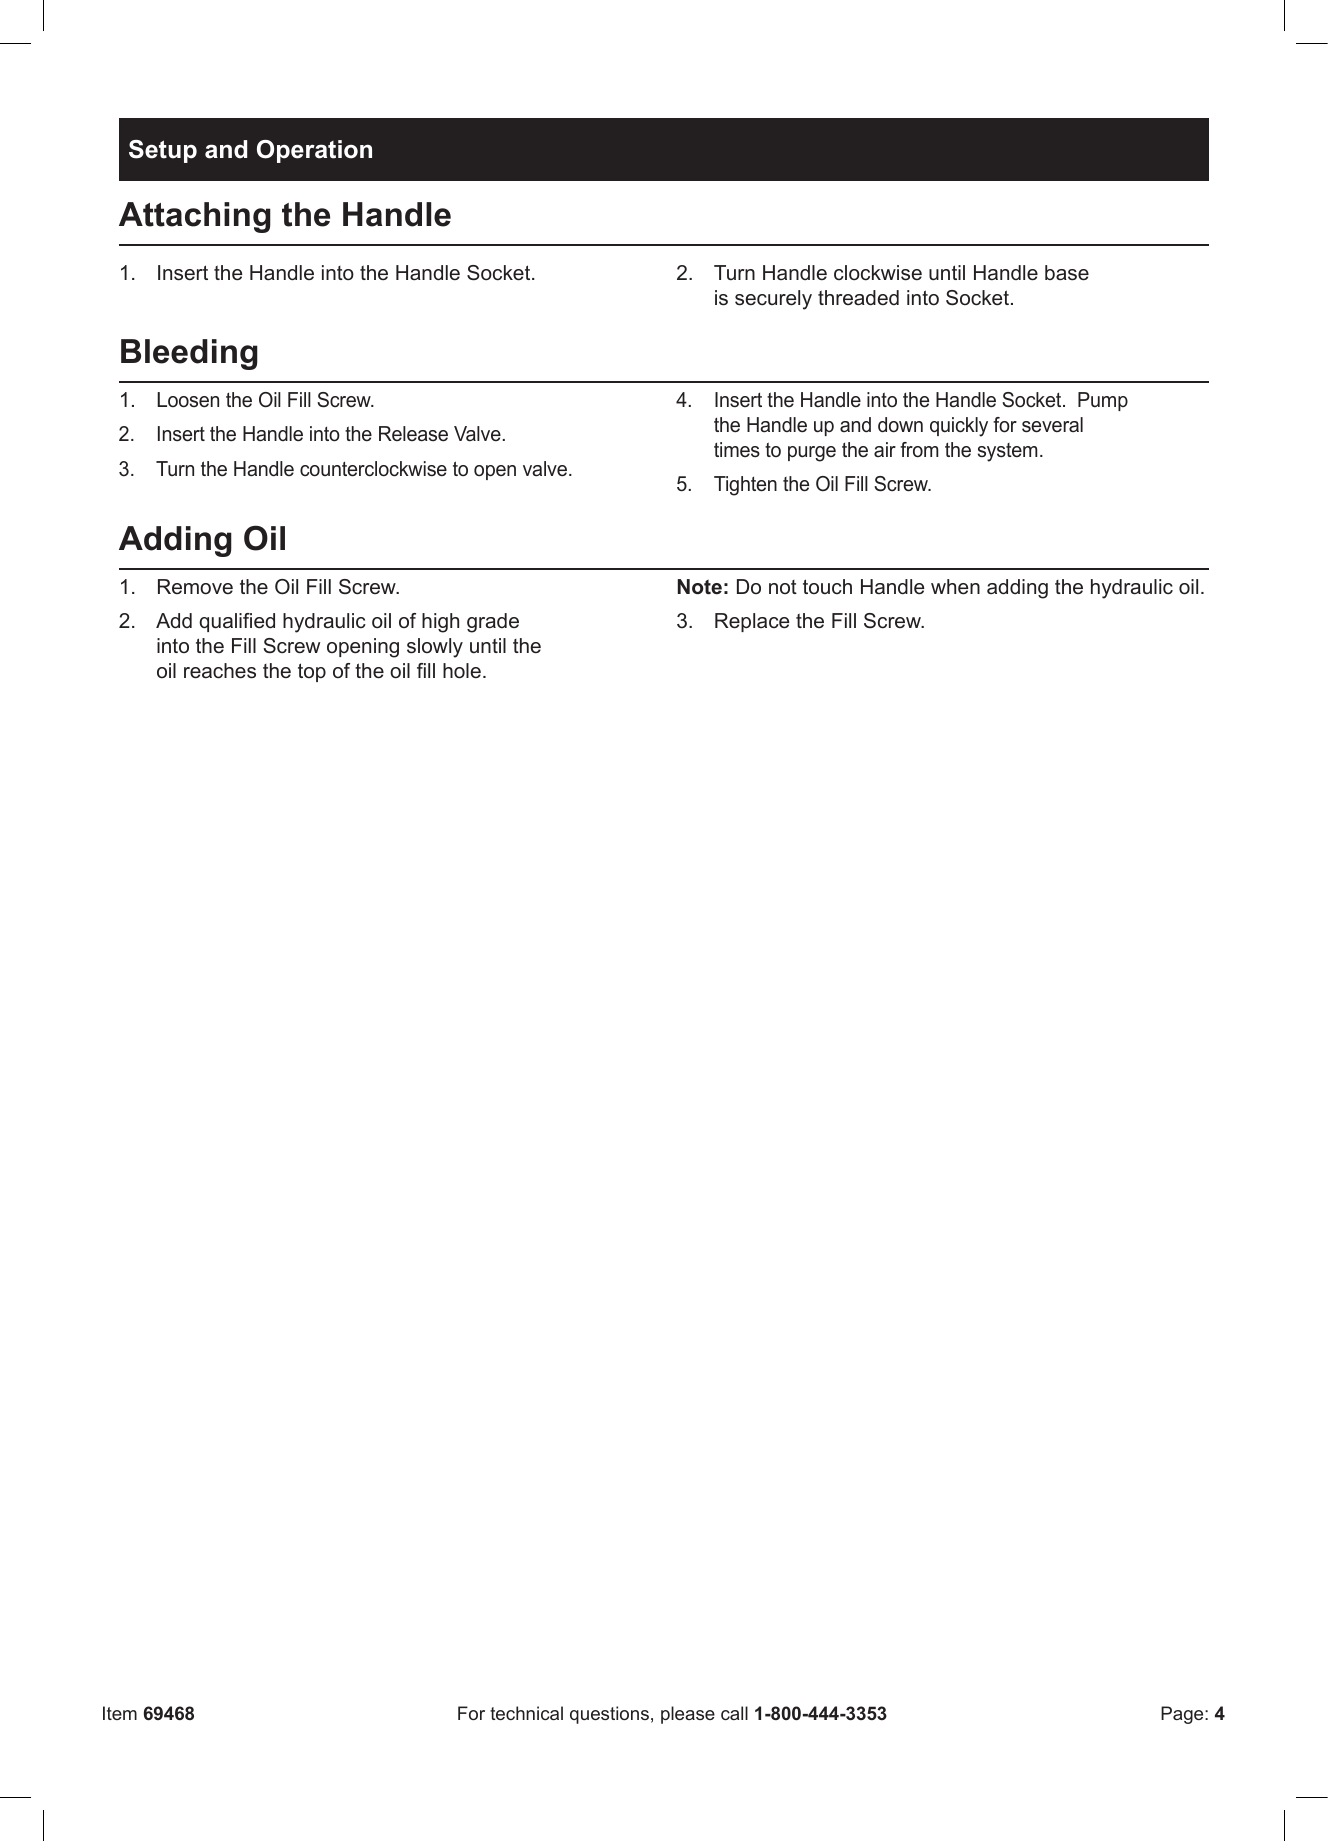 Page 4 of 8 - Harbor-Freight Harbor-Freight-69468-Owner-S-Manual